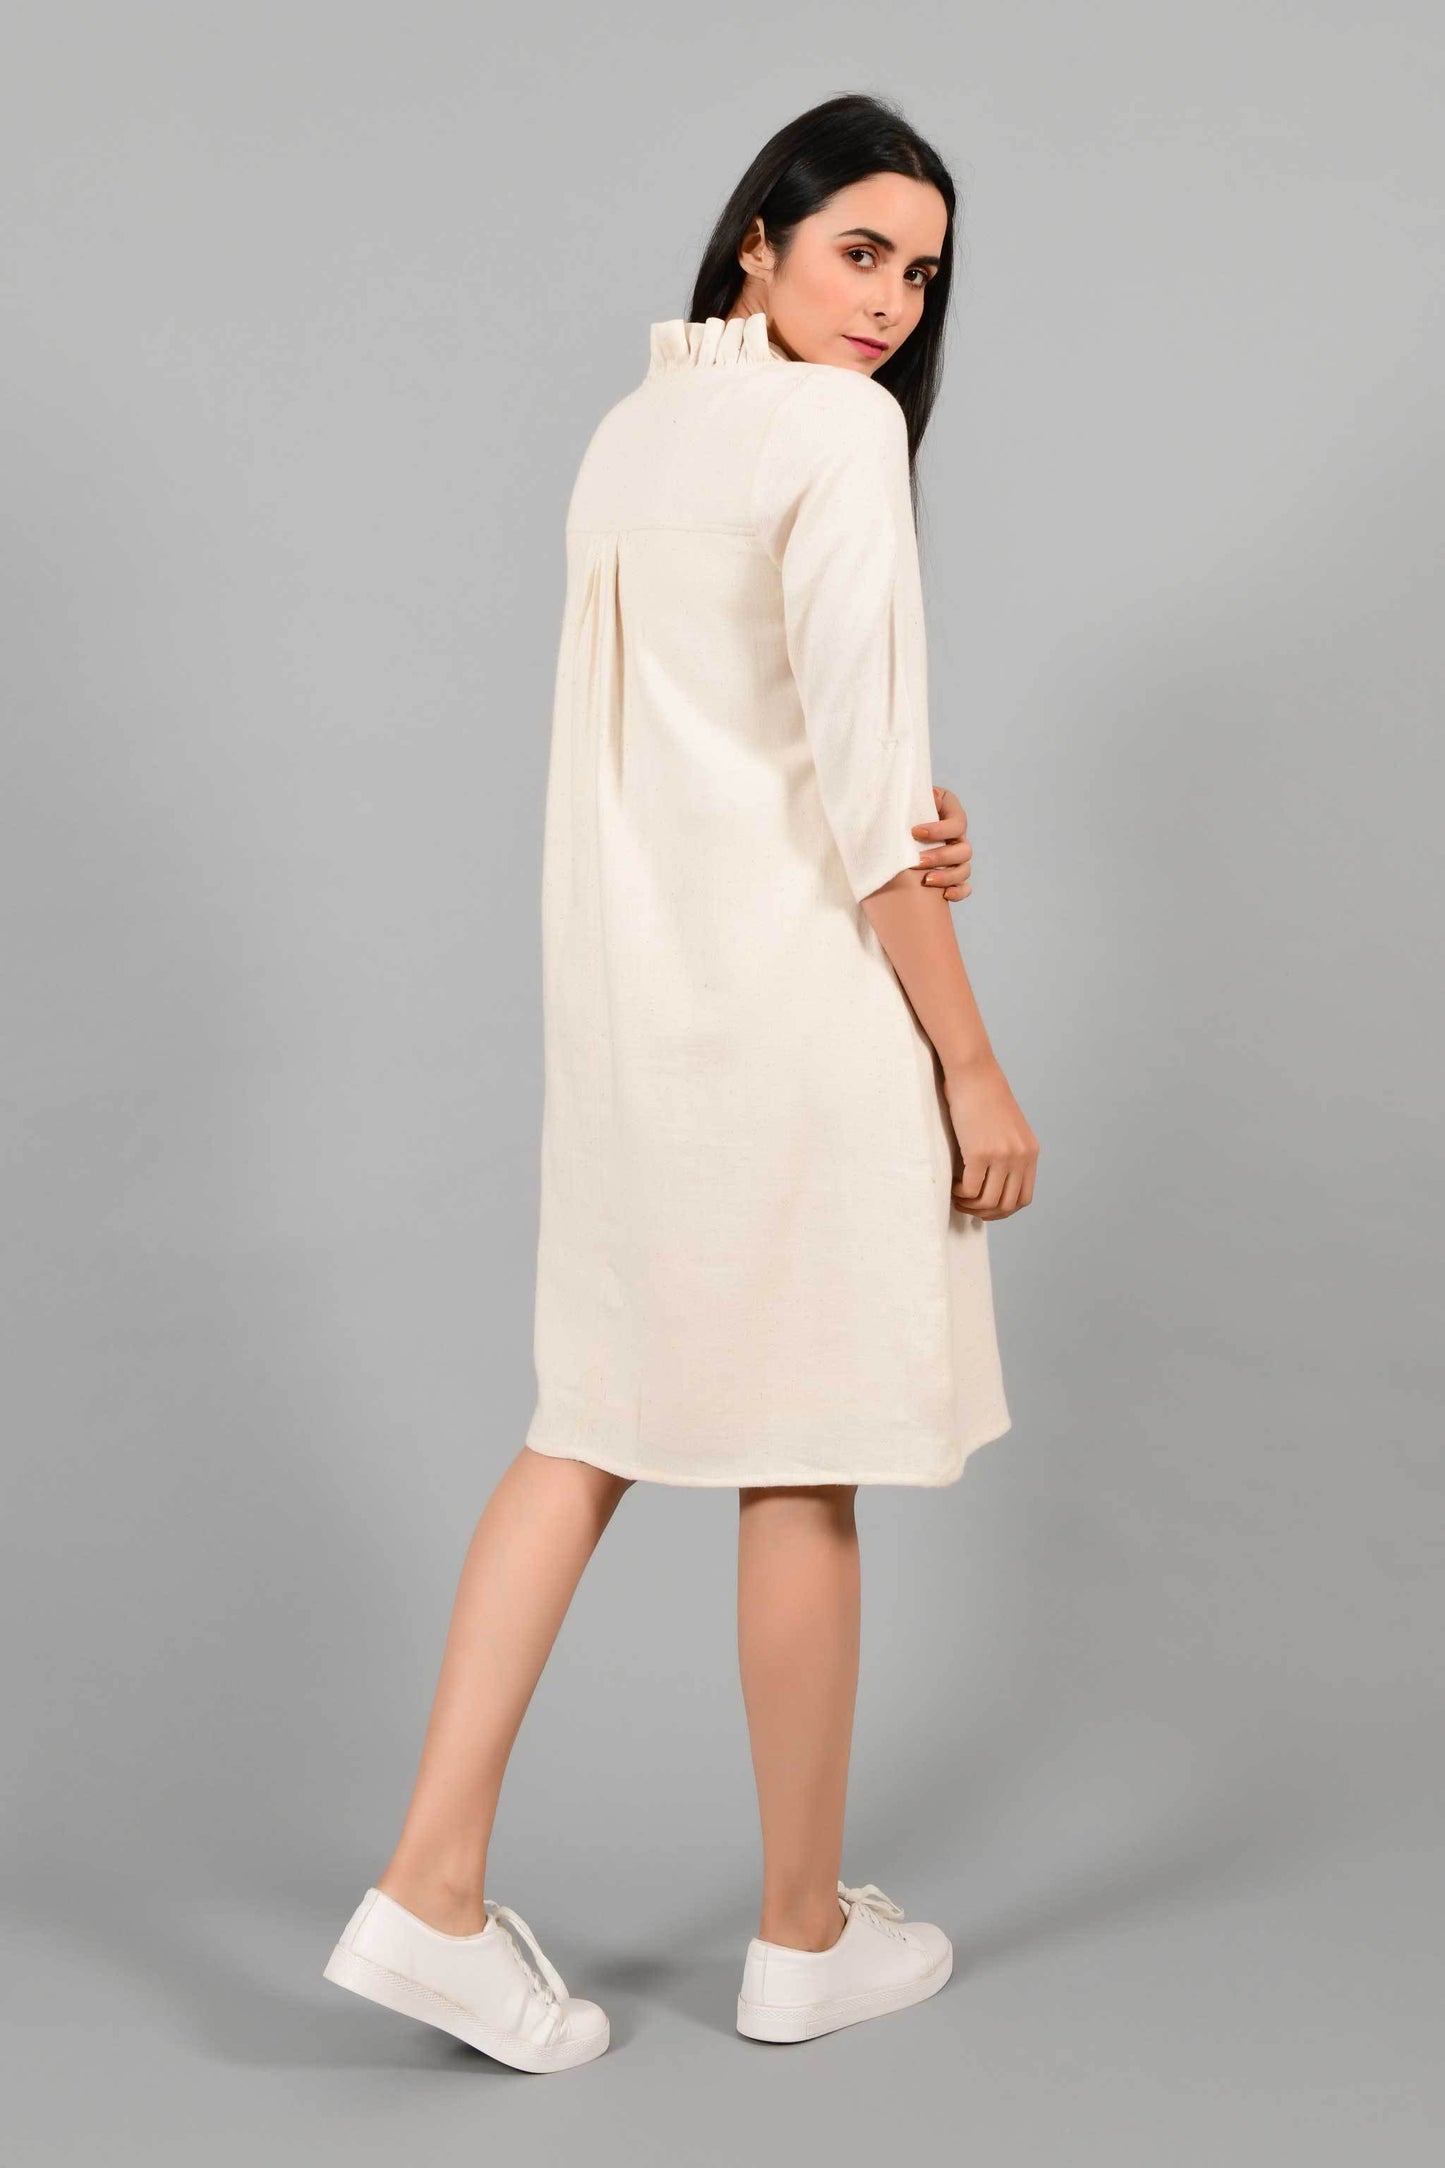 Back pose of an Indian female womenswear fashion model in an off-white Cashmere Cotton Dress with flared neck, made using handspun and handwoven khadi cotton by Cotton Rack.